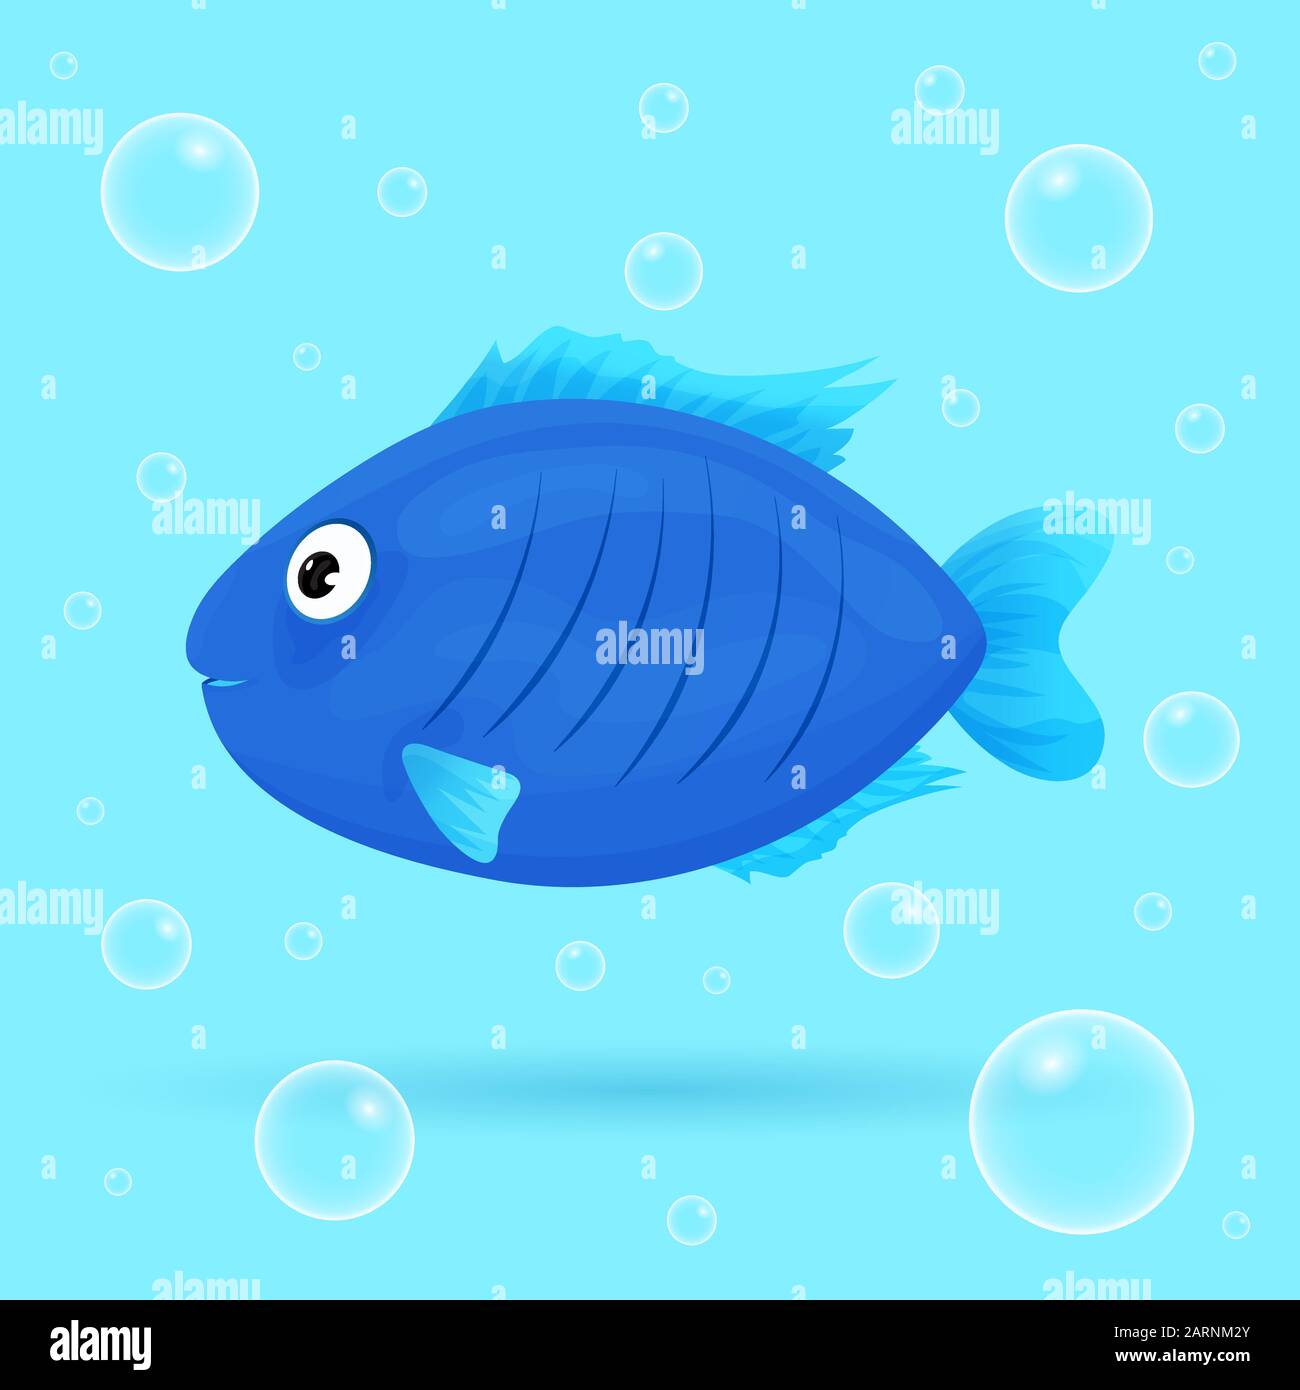 Free Vector  Cute bright fish game cartoon character set vector  illustration of underwater sea or aquarium creatures marine and ocean  tropical animals with smiling faces aquatic saltwater colorful critters